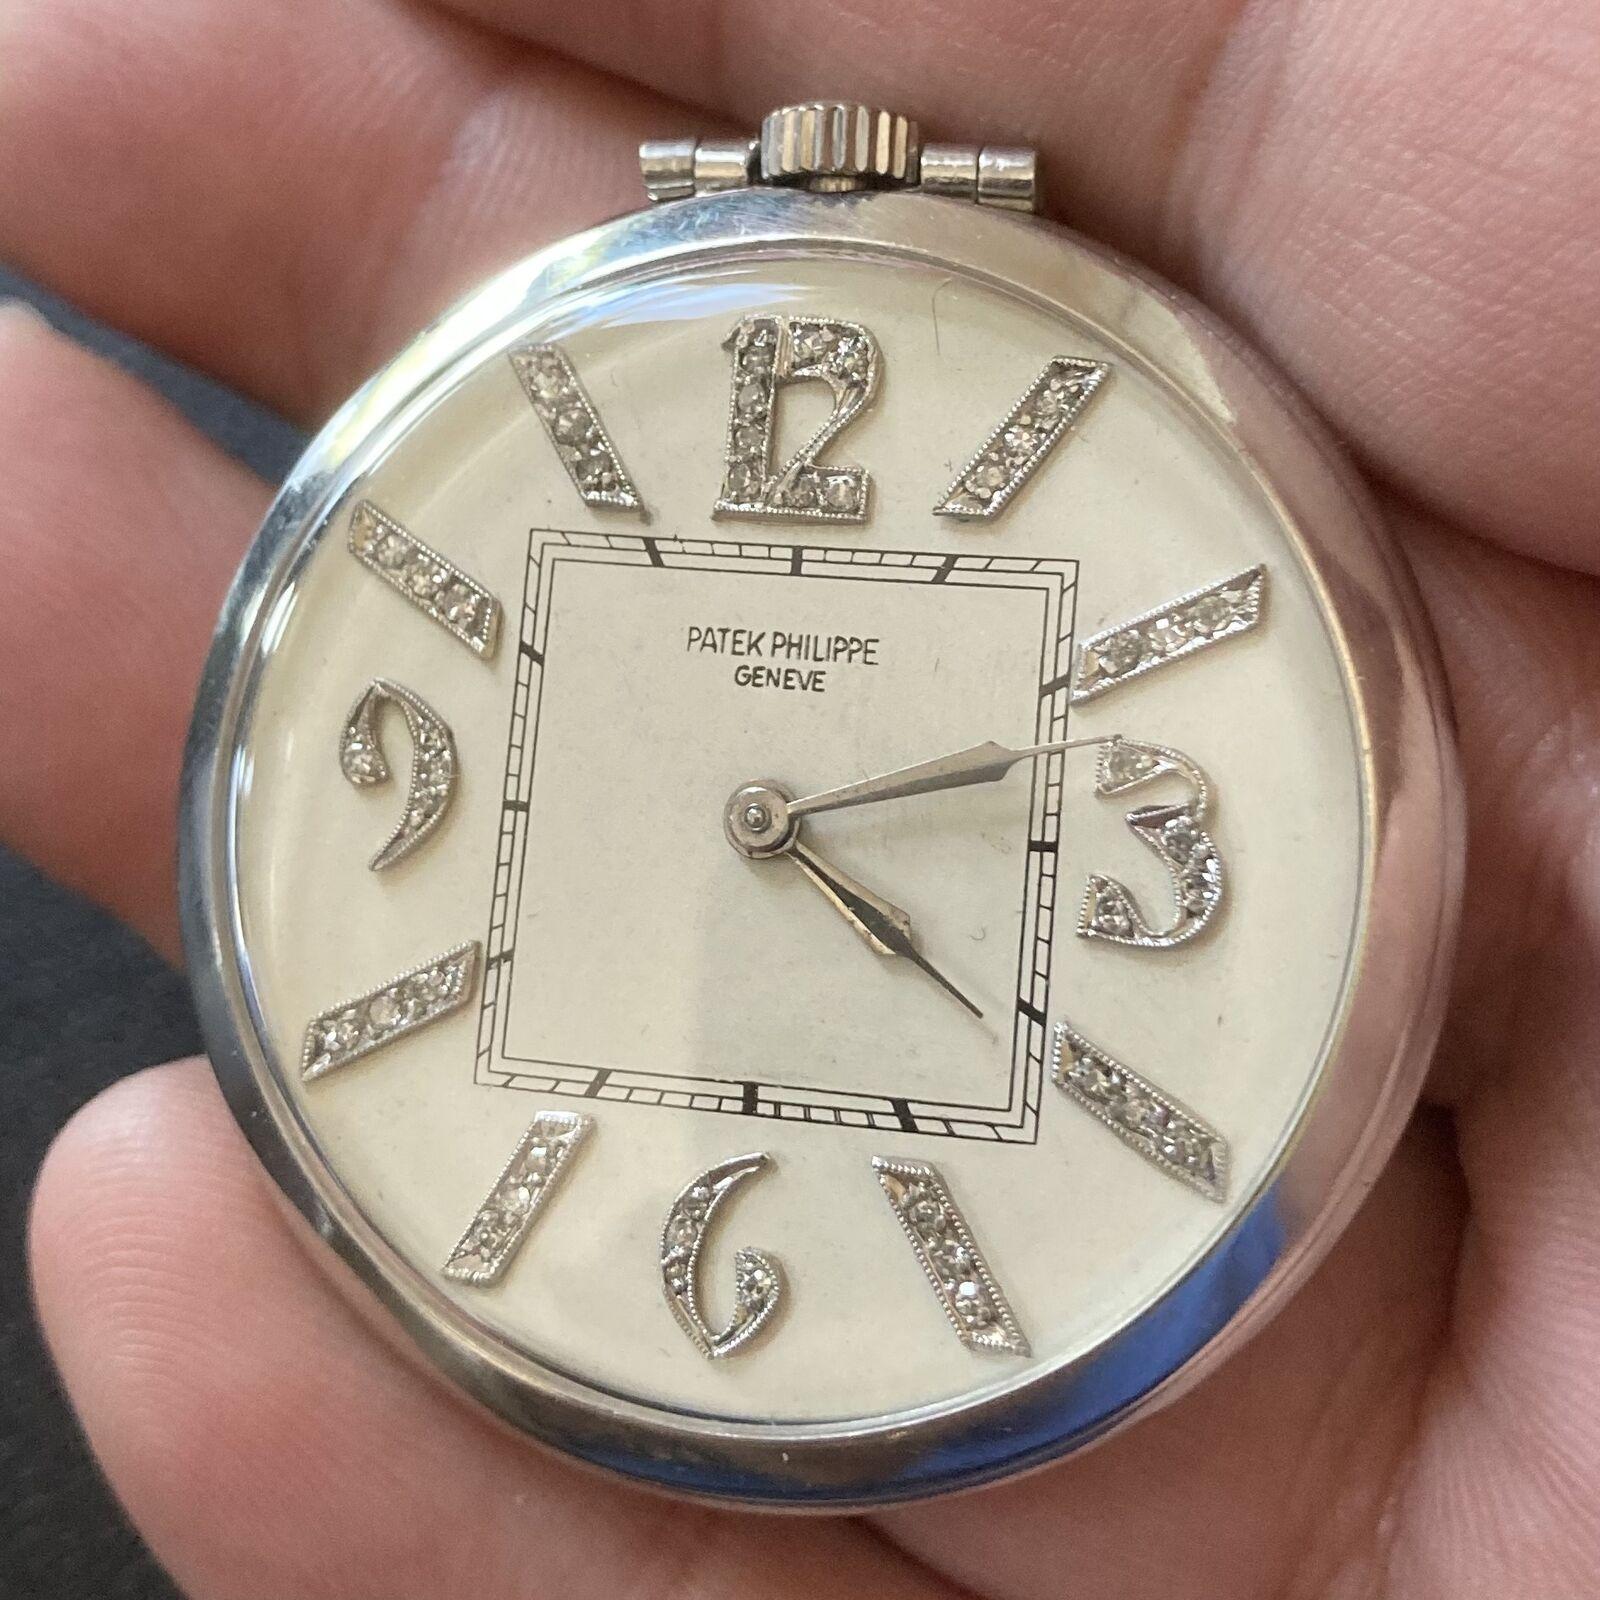 Platinum diamond vintage pocket watch by Patek Philippe.
Works great, fully functional. Serial number 75738 dates this pocket watch to circa 1885.
Details:
Case Size: 41mm (14s)
Weight: 49.4 grams
Movement: Manual wind
Dial: Diamonds on 3,6,9,12,